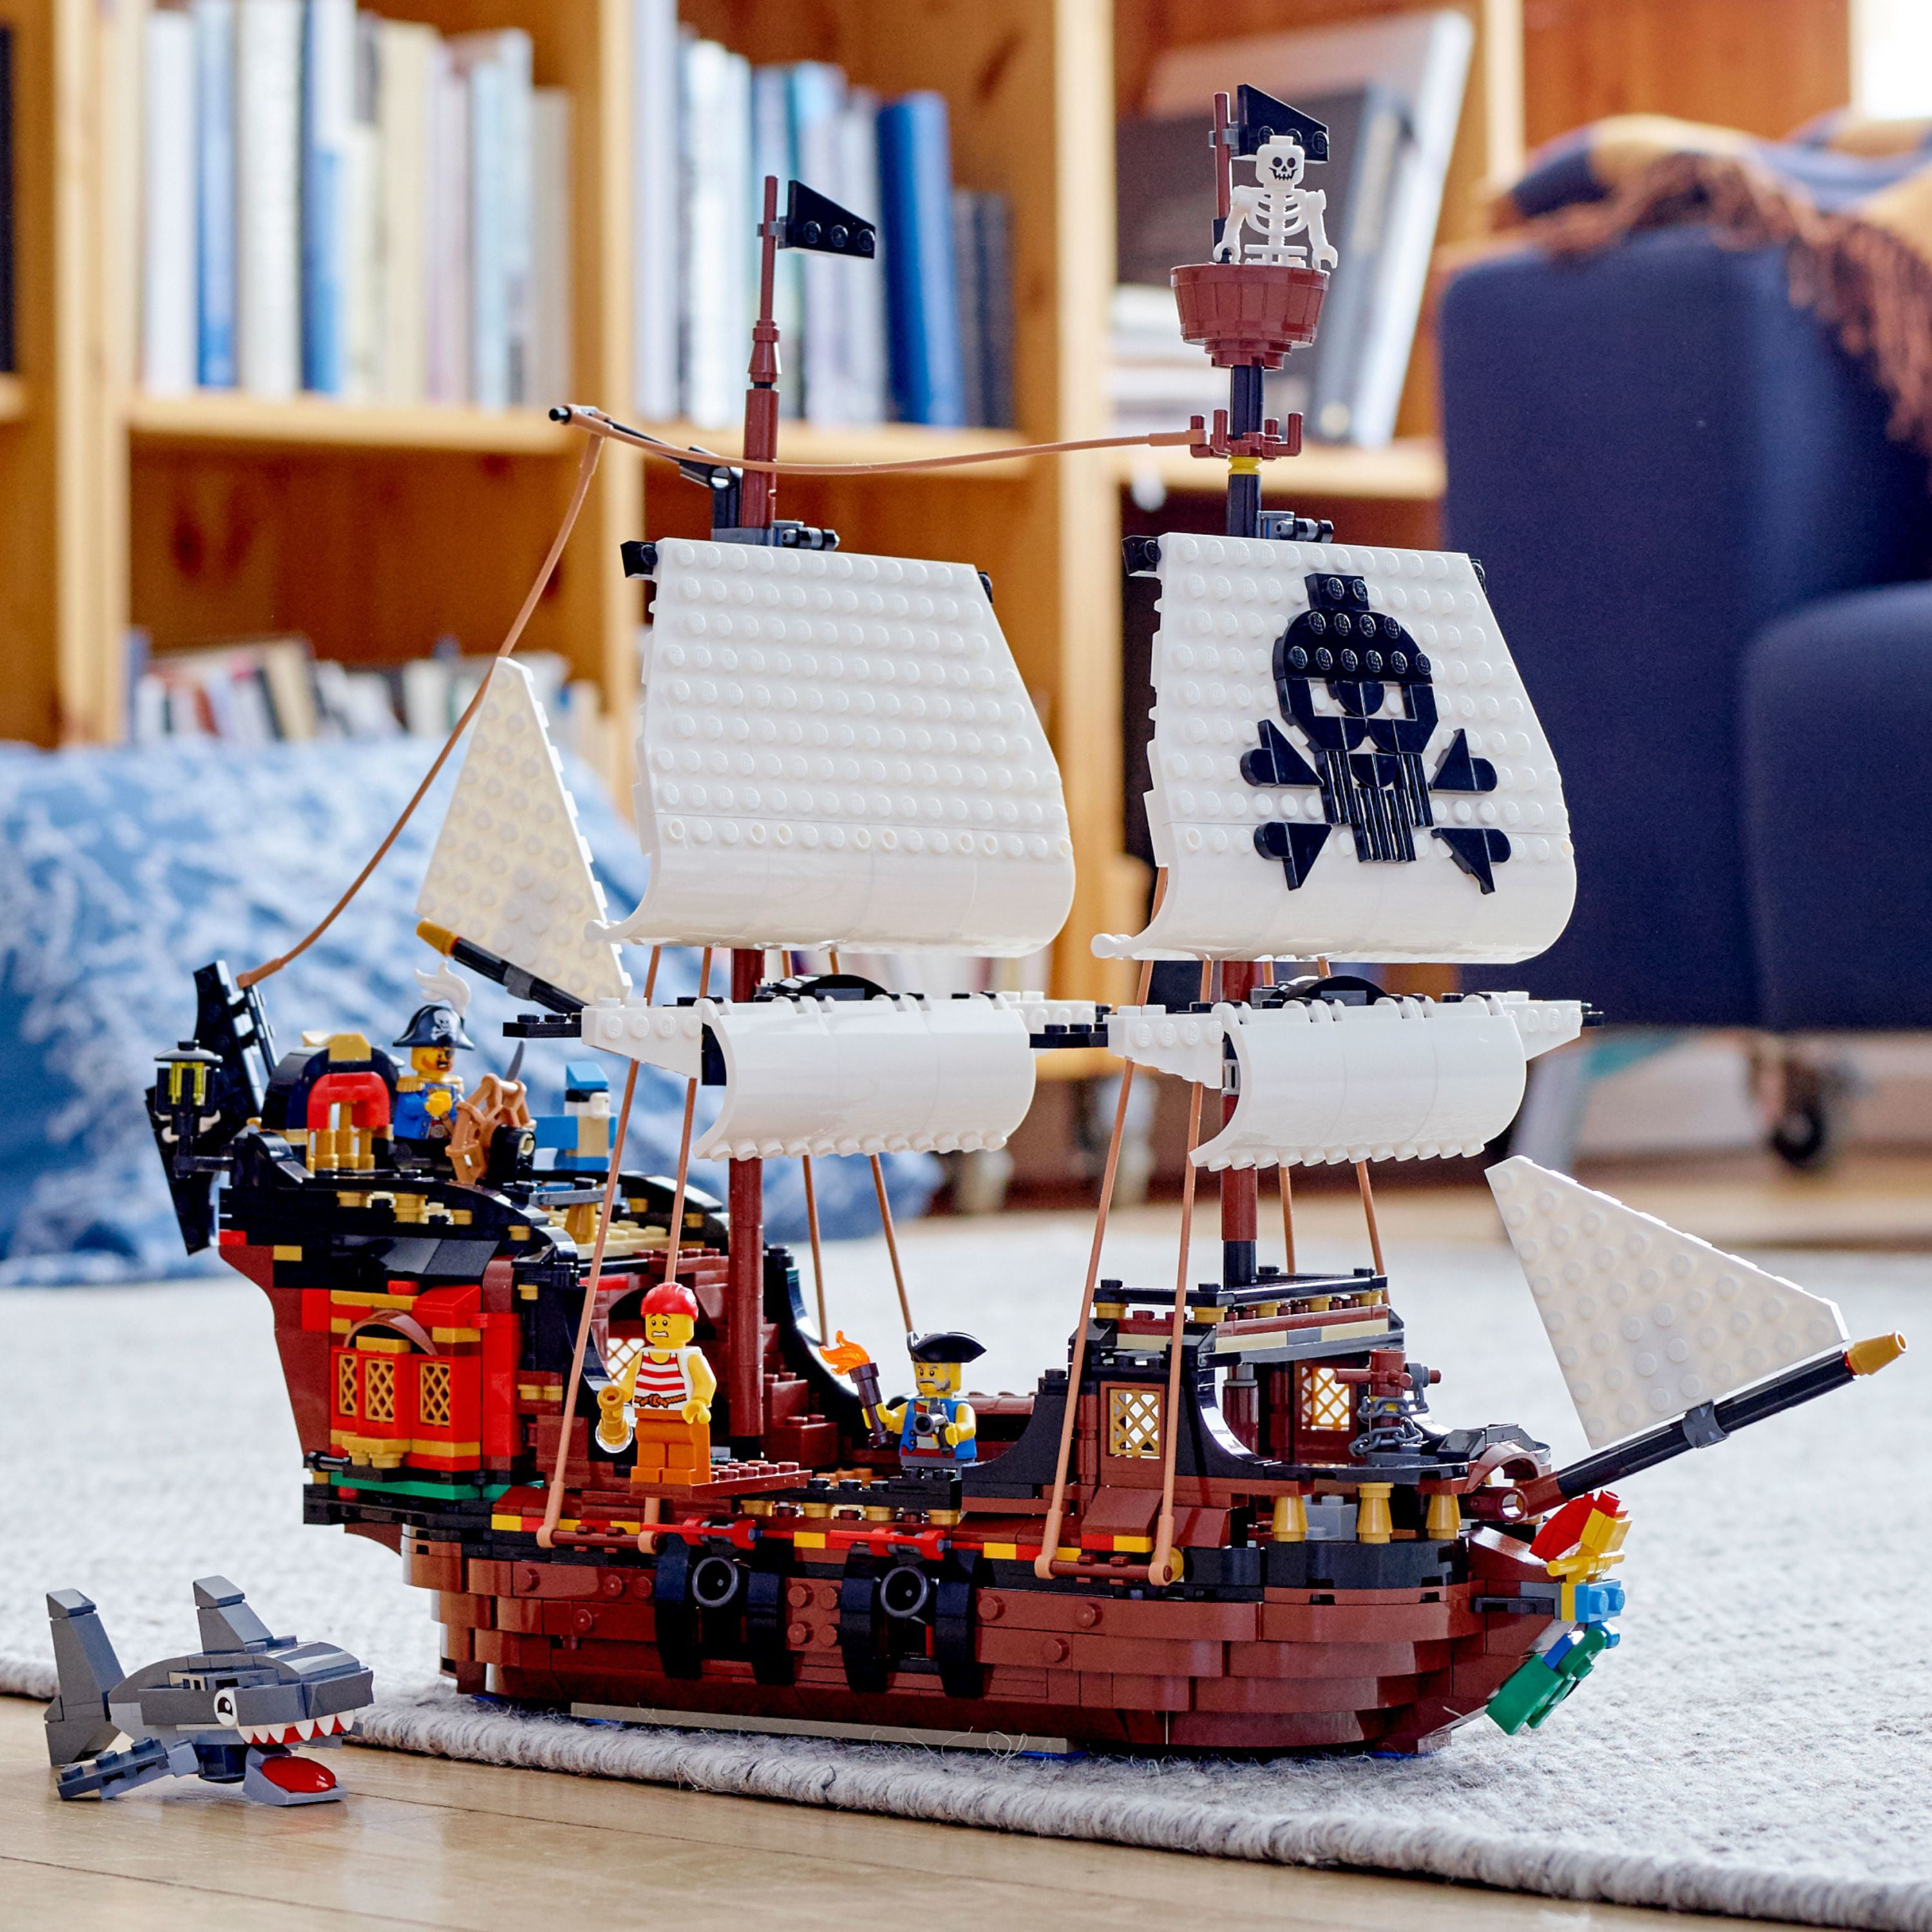 Pirate Ship 31109 | Creator 3-in-1 | Buy online at the Official LEGO® Shop  US